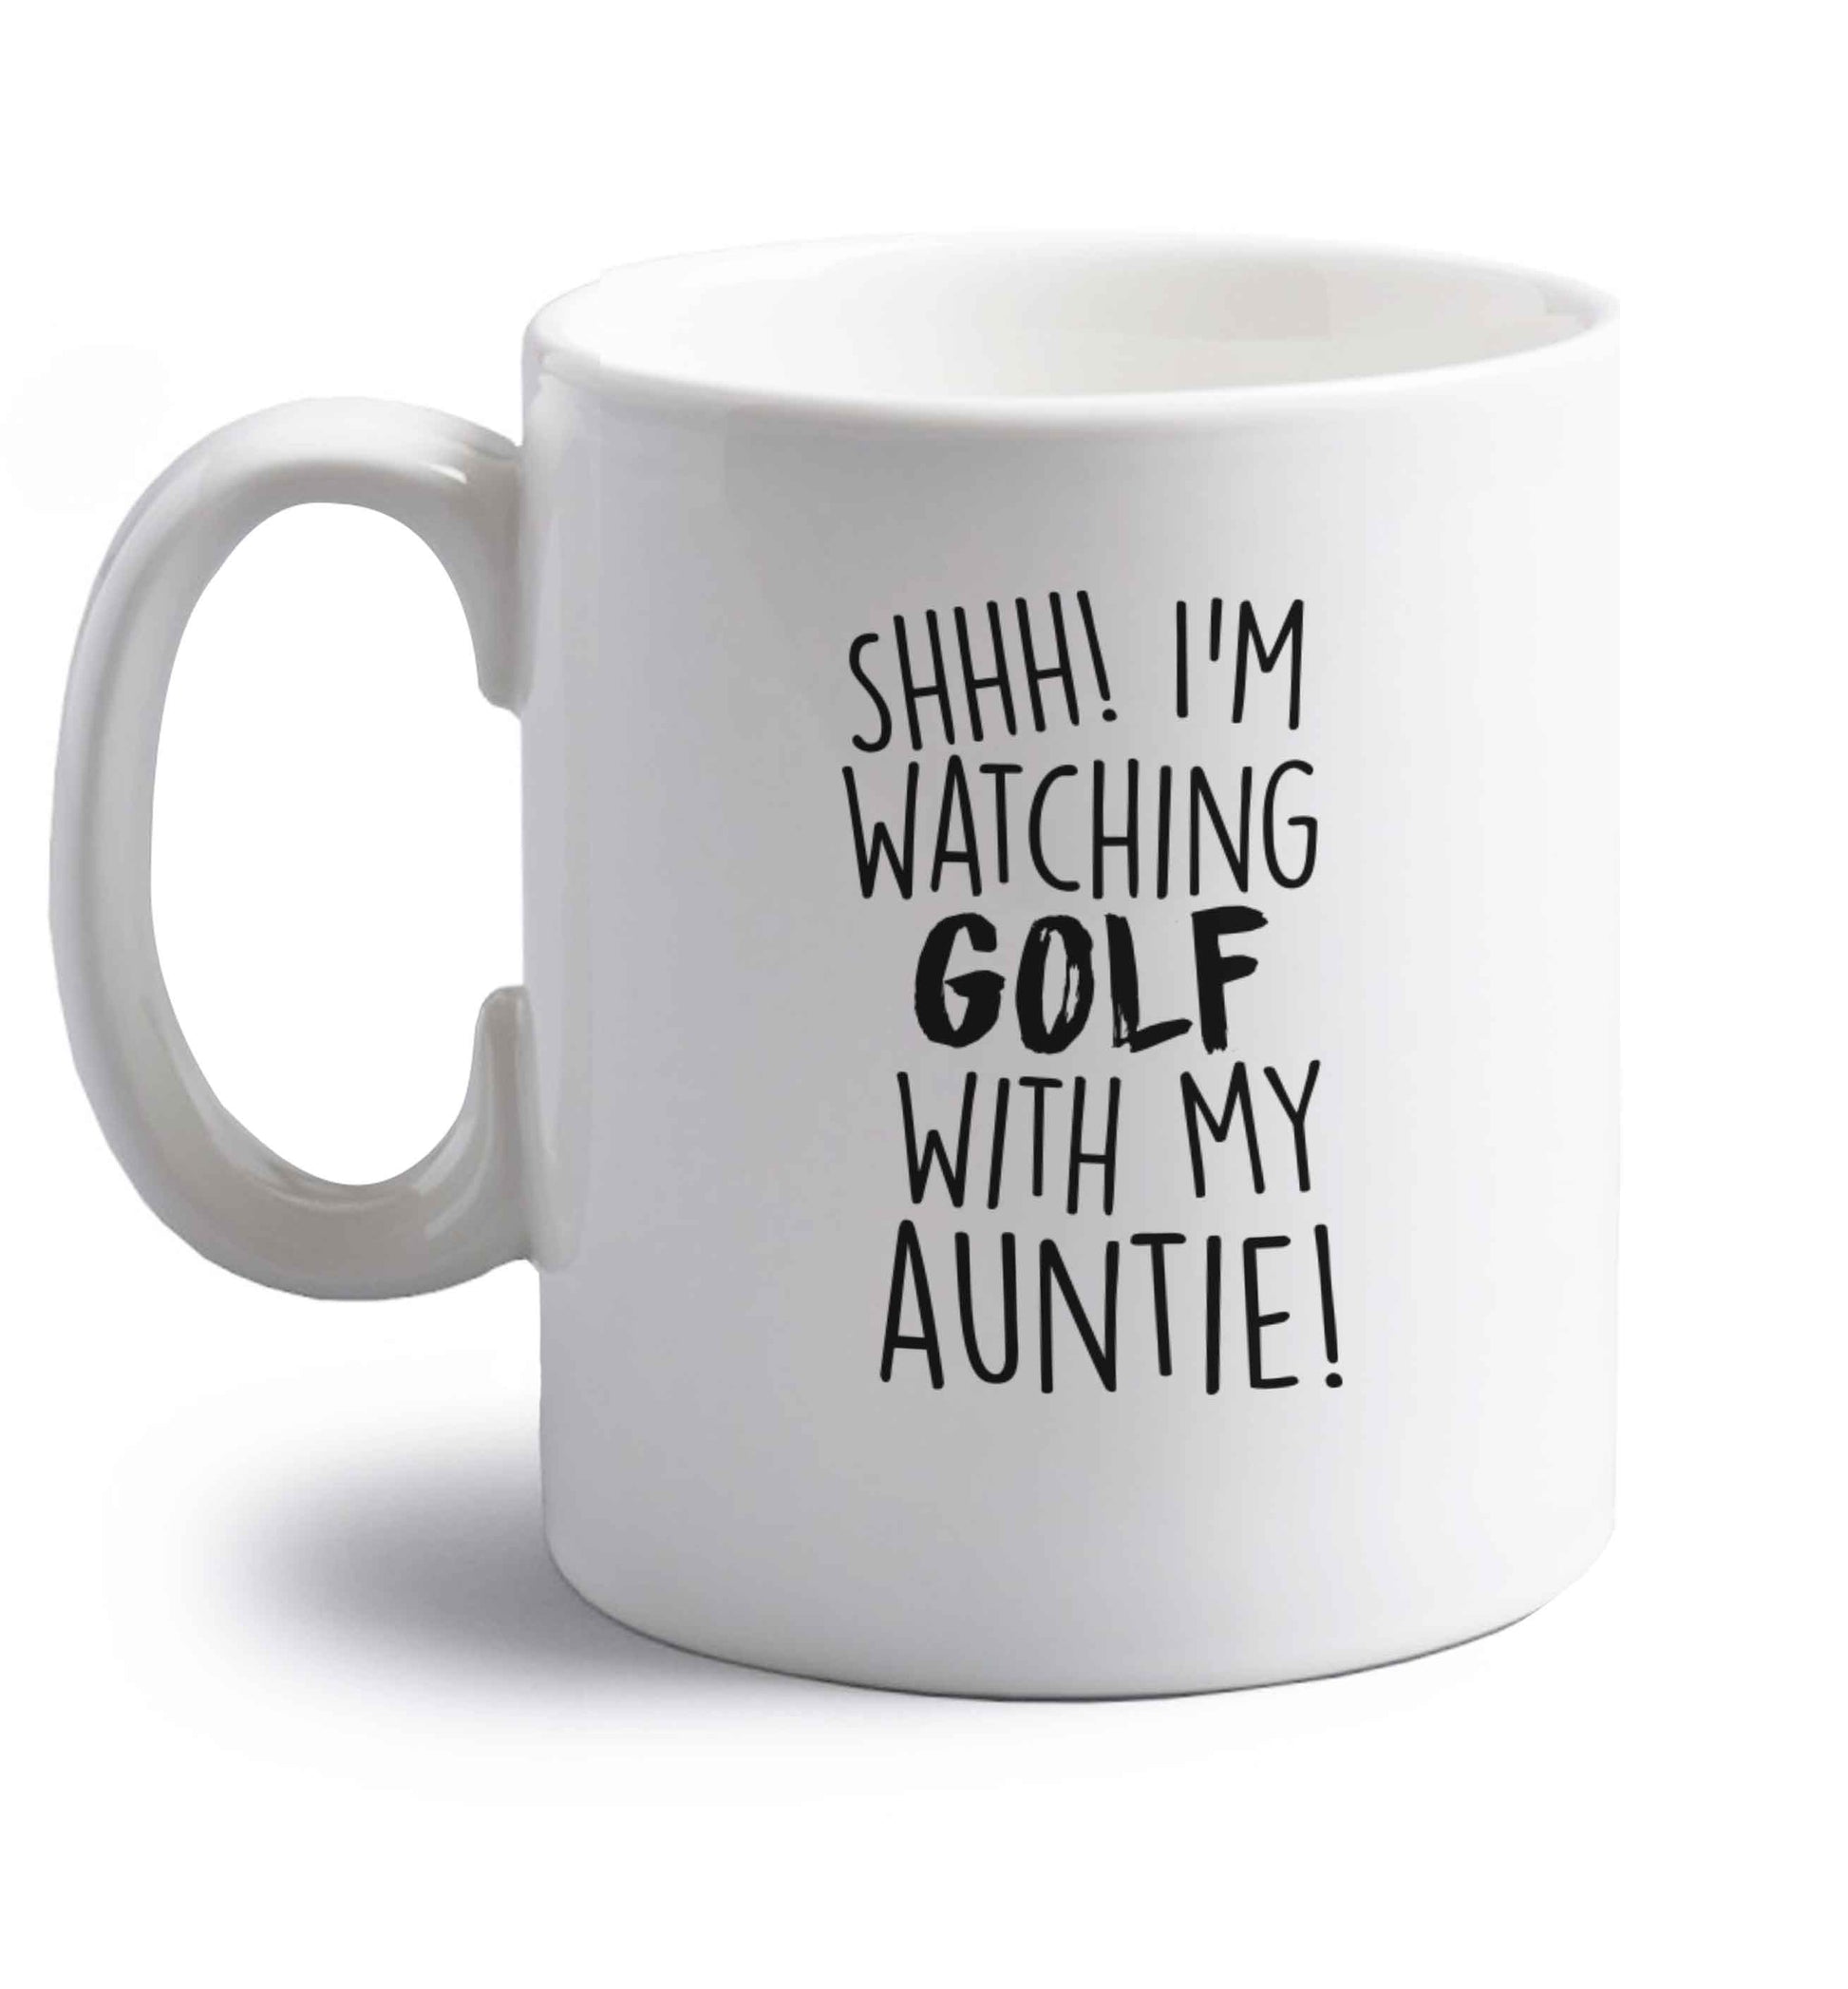 Shh I'm watching golf with my auntie right handed white ceramic mug 